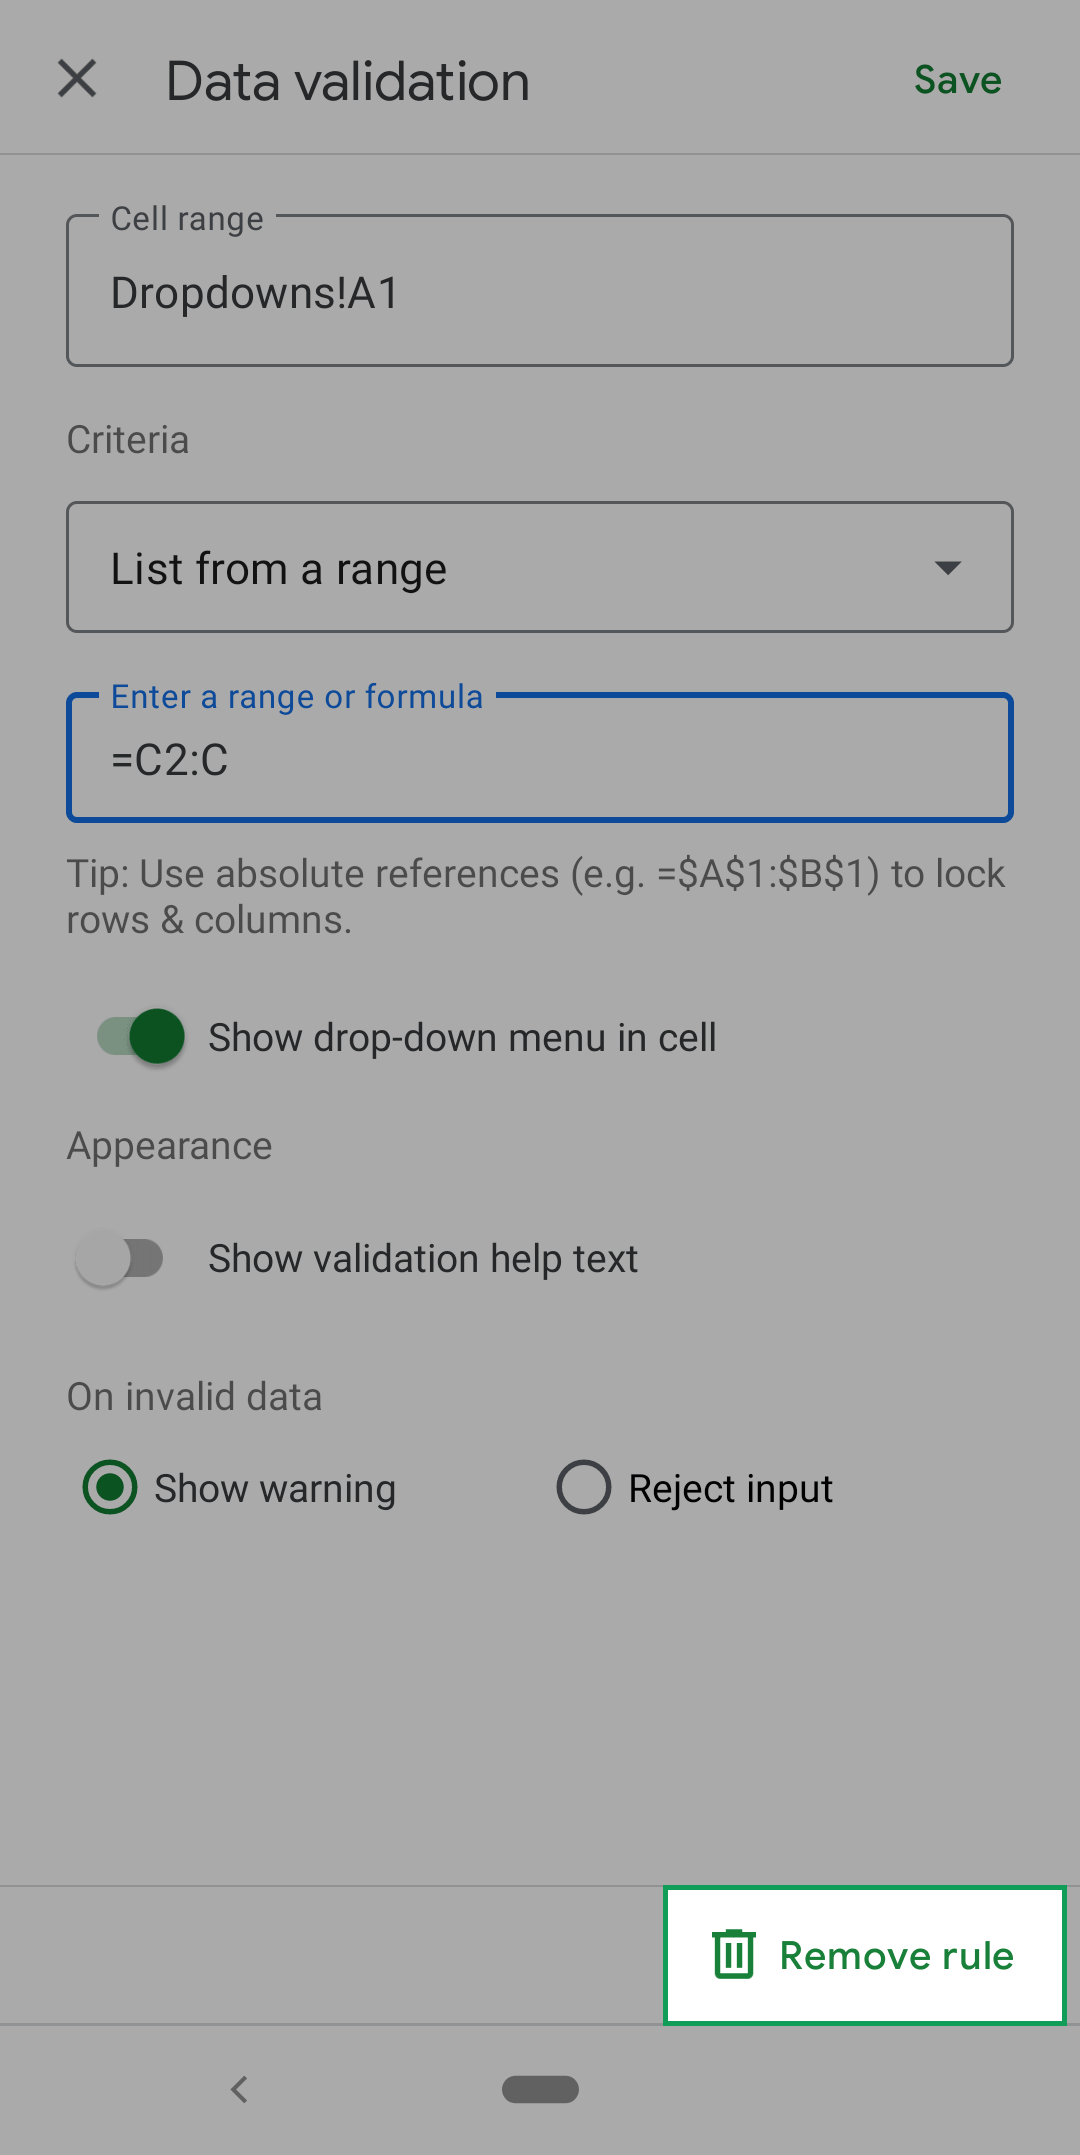 shows location of the remove rule button at the bottom of the screen in the data validation menu on android